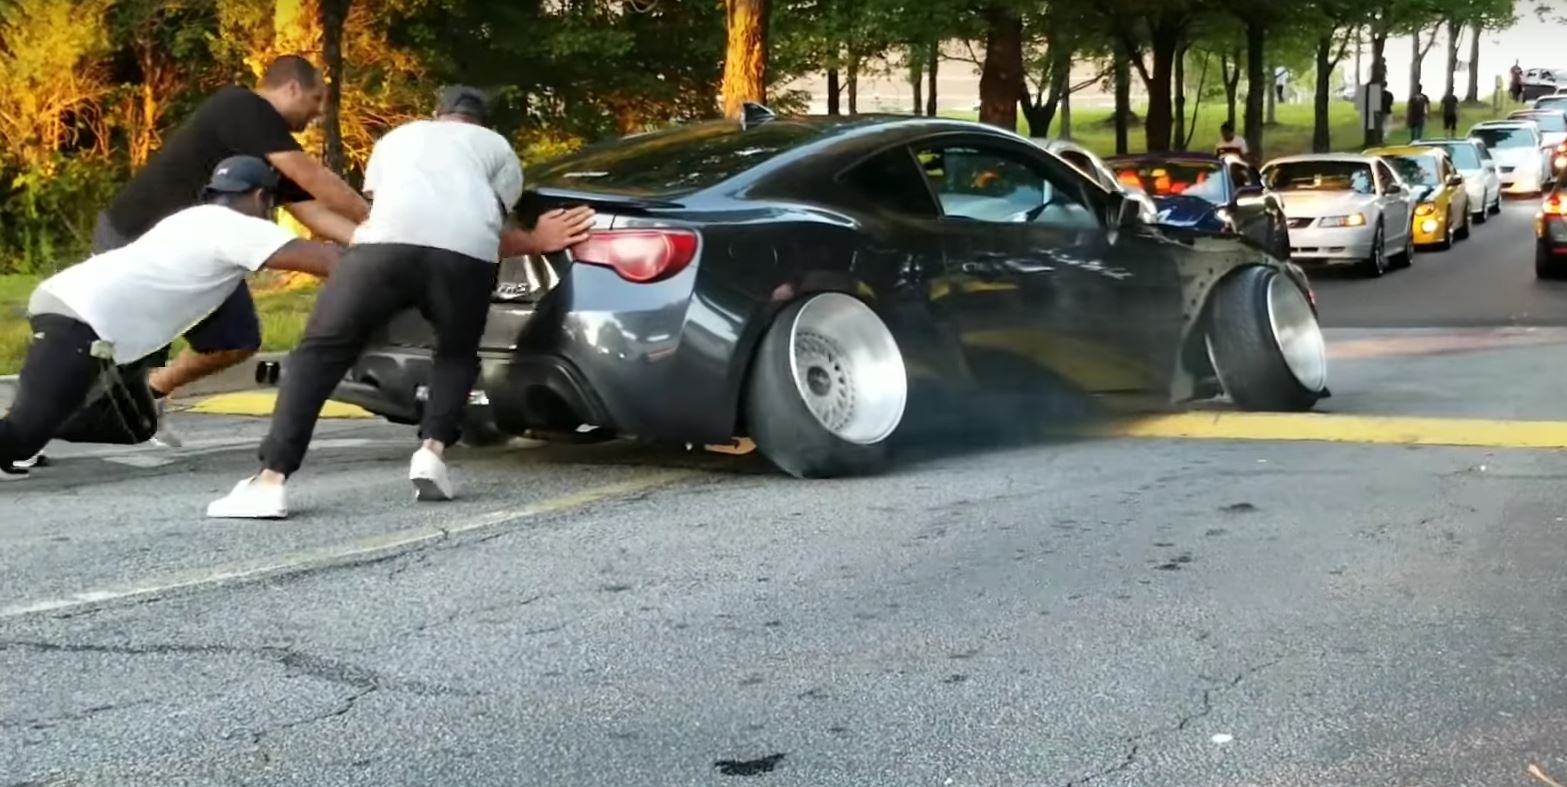 camber-style-scion-fr-s-goes-viral-by-getting-stuck-128311_1.jpg